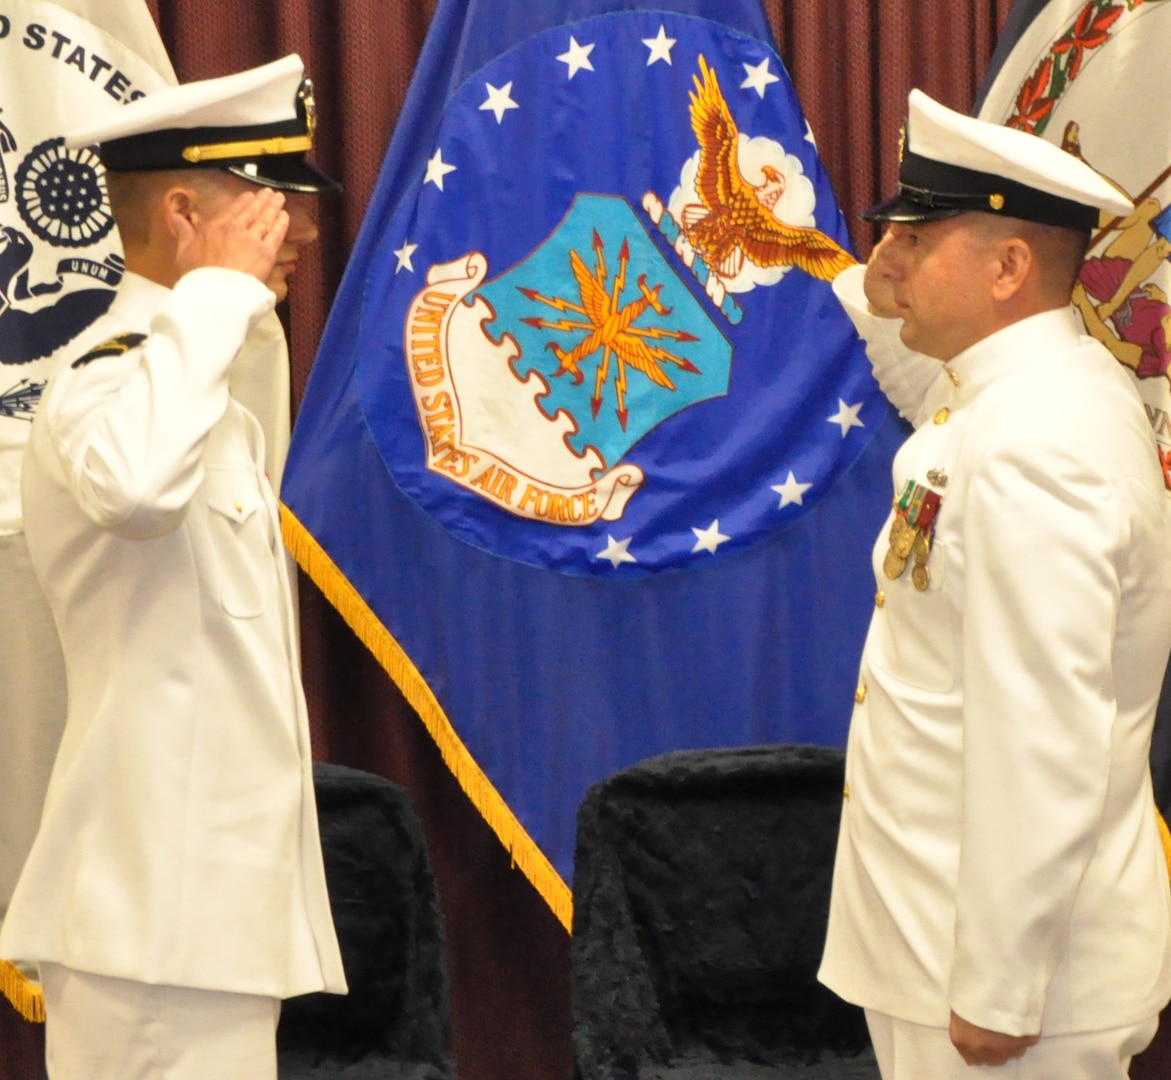 IMAGE: DAHLGREN, Va. (Sept. 11, 2018) – Senior Chief Fire Controlman Jeremy Brown (ret.) renders the first enlisted salute to U.S. Navy Ensign Dillard Patton who returns the salute at his commissioning ceremony held at the Aegis Training and Readiness Center. In accordance with tradition, Patton - an NSWCDD System Safety Engineering Division civilian engineer - presented a brand new silver dollar to Brown as the first enlisted service member who saluted him. Upon receiving the silver dollar, Brown saluted and Patton returned the salute again.